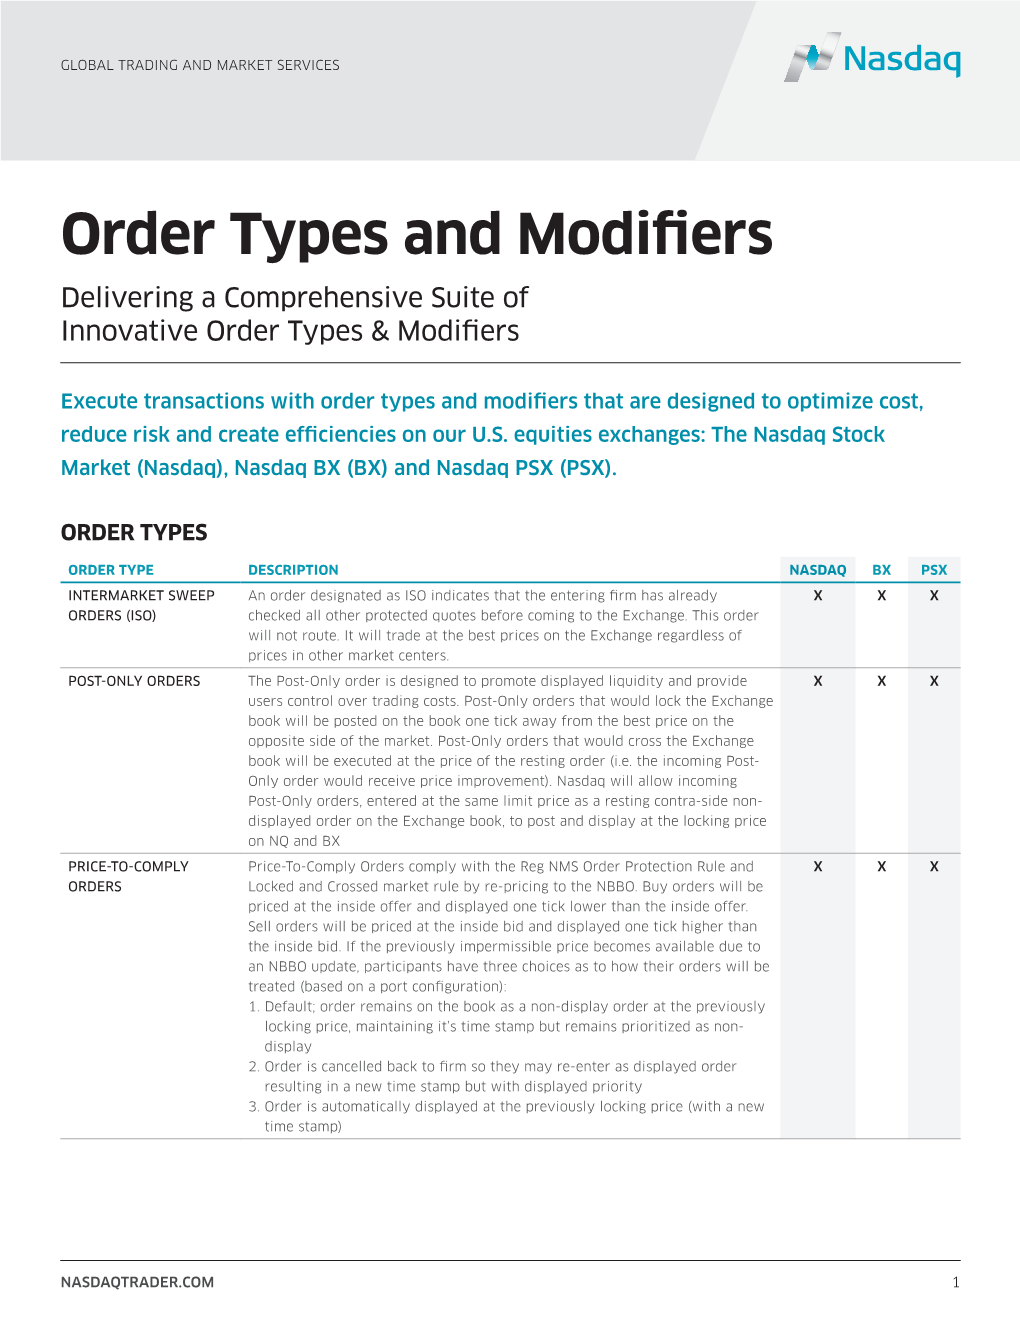 Order Types and Modifiers Delivering a Comprehensive Suite of Innovative Order Types & Modifiers